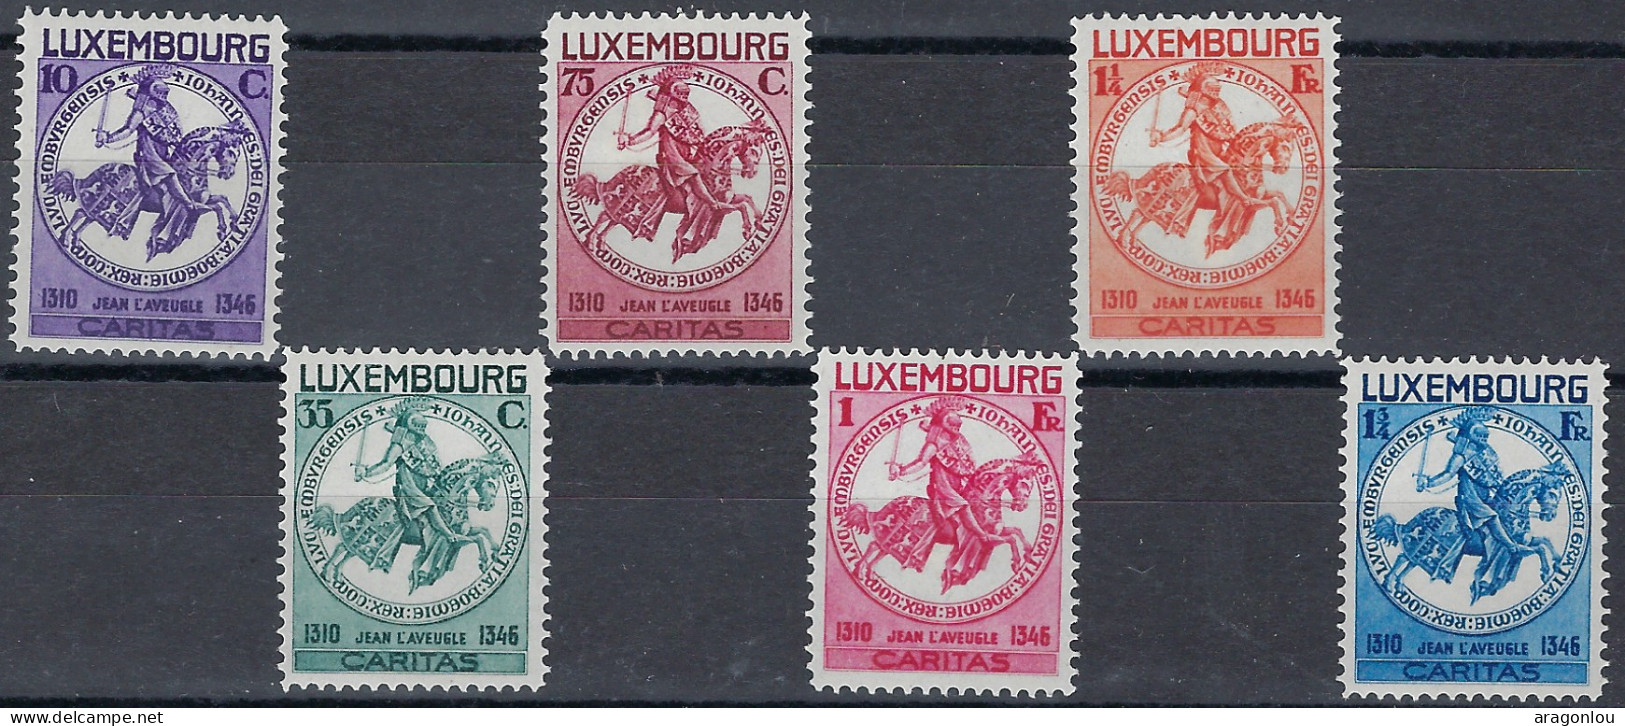 Luxembourg - Luxemburg - Timbres - 1934   Jean L'Aveugle   Série  * - Gebraucht